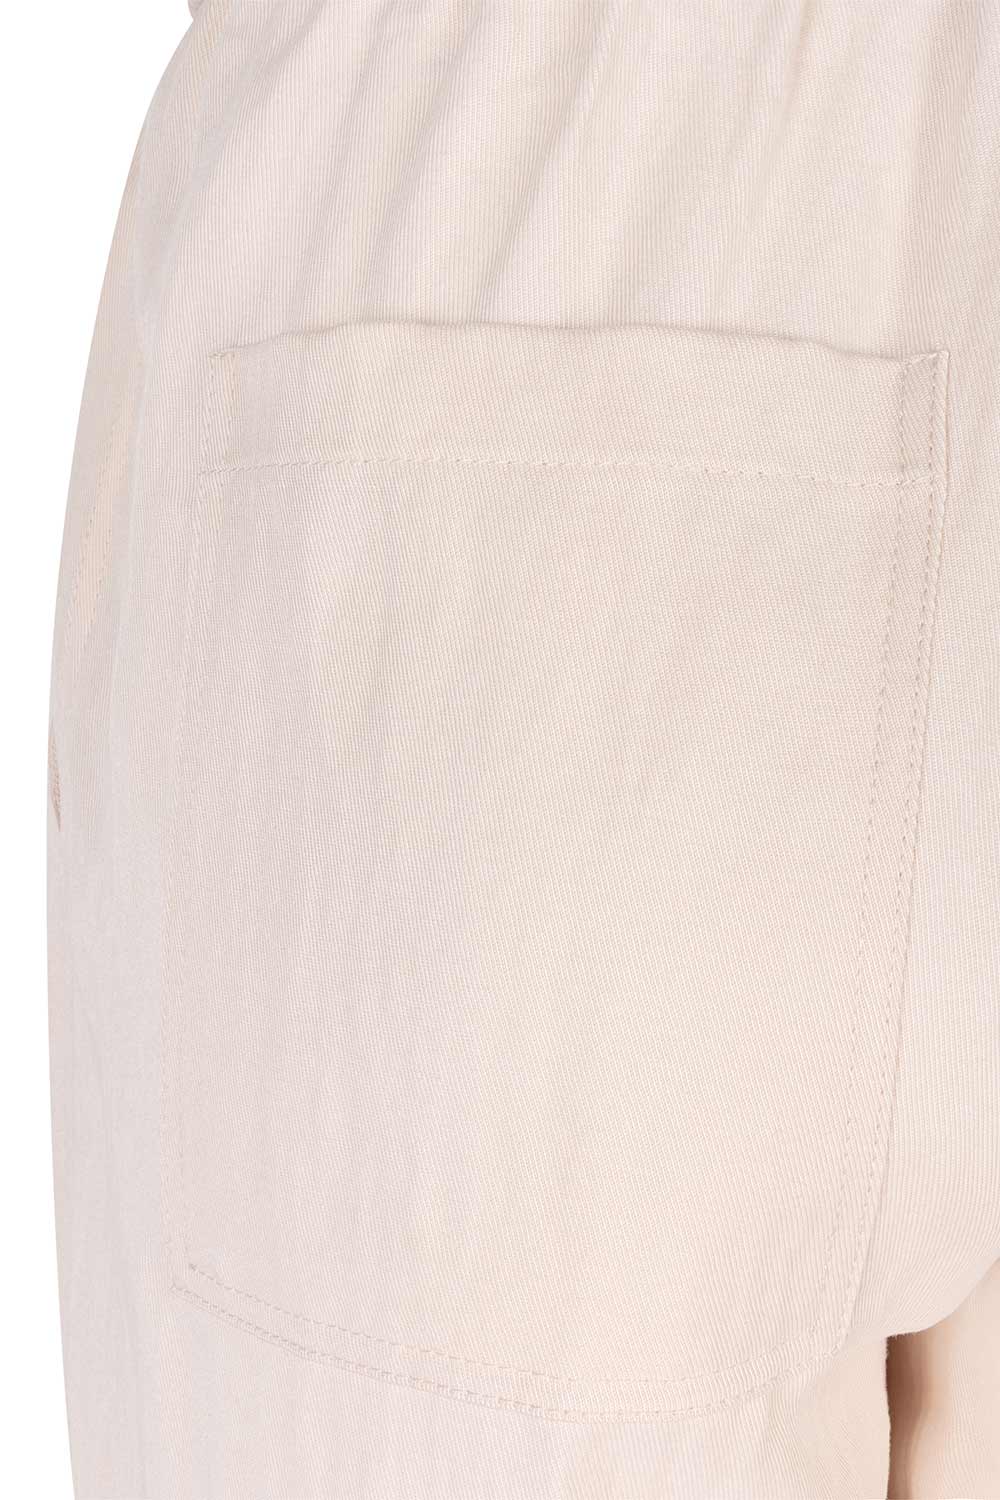 Back pocket on Esqualo (SP2410017) Women's Pull On High Rise Wide Leg Trousers with Pockets in Sand